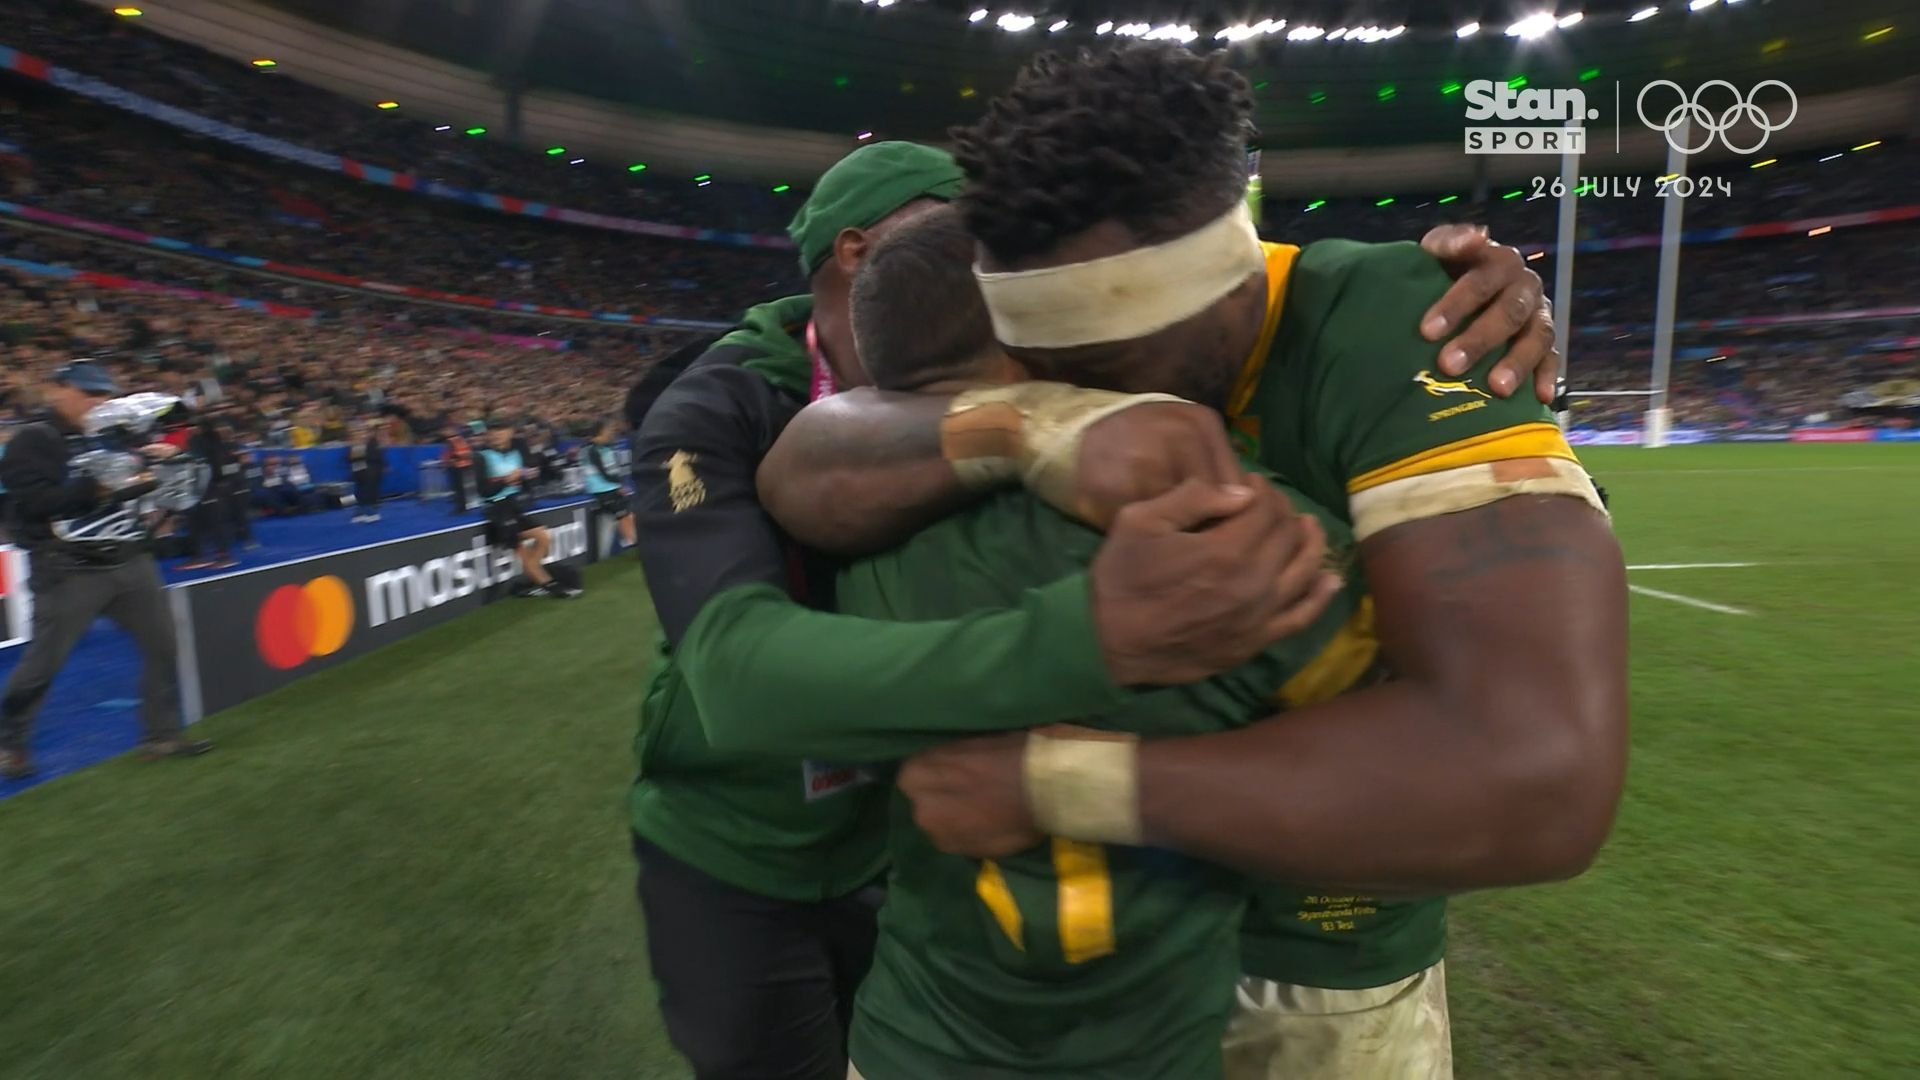 Springboks defeat All Blacks in 12-11 thriller to become first four-time Rugby World Cup winners